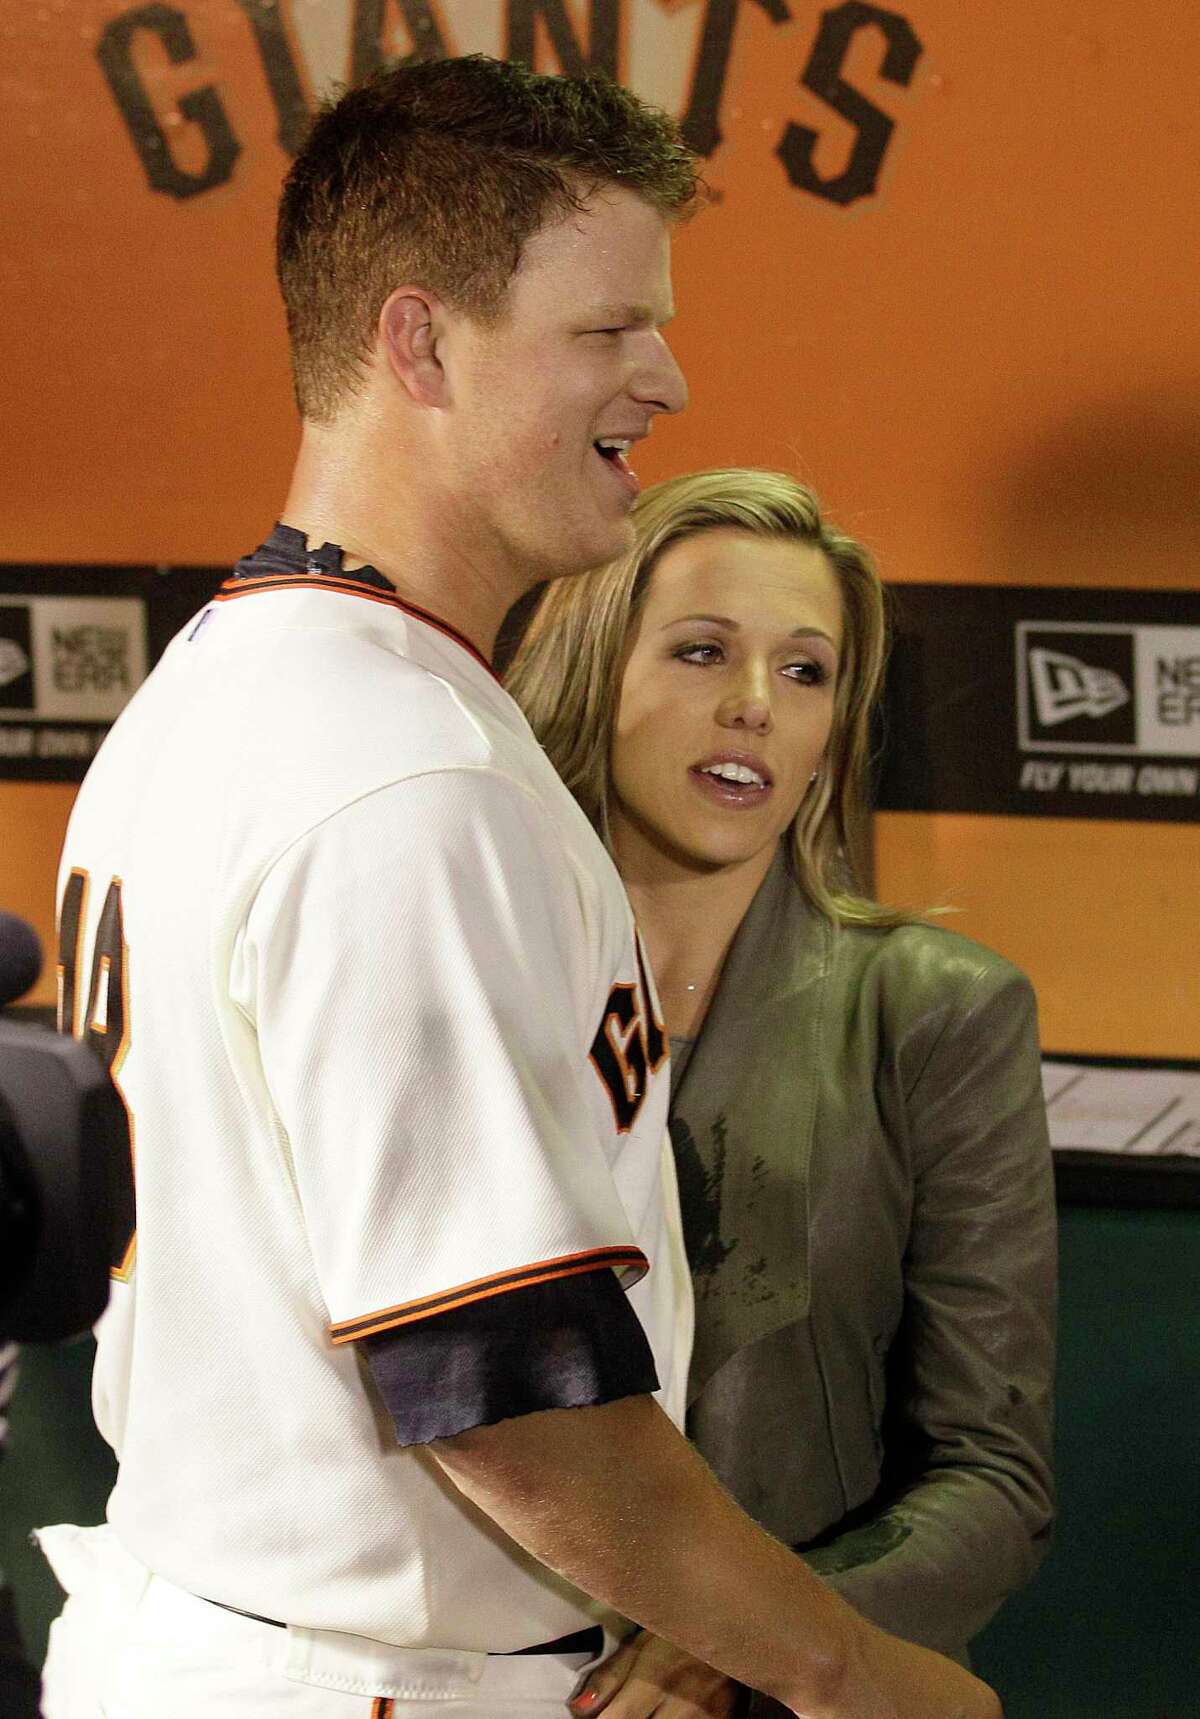 San Francisco Giants pitcher Matt Cain, left, celebrates with his wife Chelsea after a baseball game against the Houston Astros in San Francisco, Wednesday, June 13, 2012. Cain pitched the 22nd perfect game in major league history and first for the Giants, striking out a career-high 14 and getting help from two spectacular catches to beat the Houston Astros 10-0. (AP Photo/Jeff Chiu)